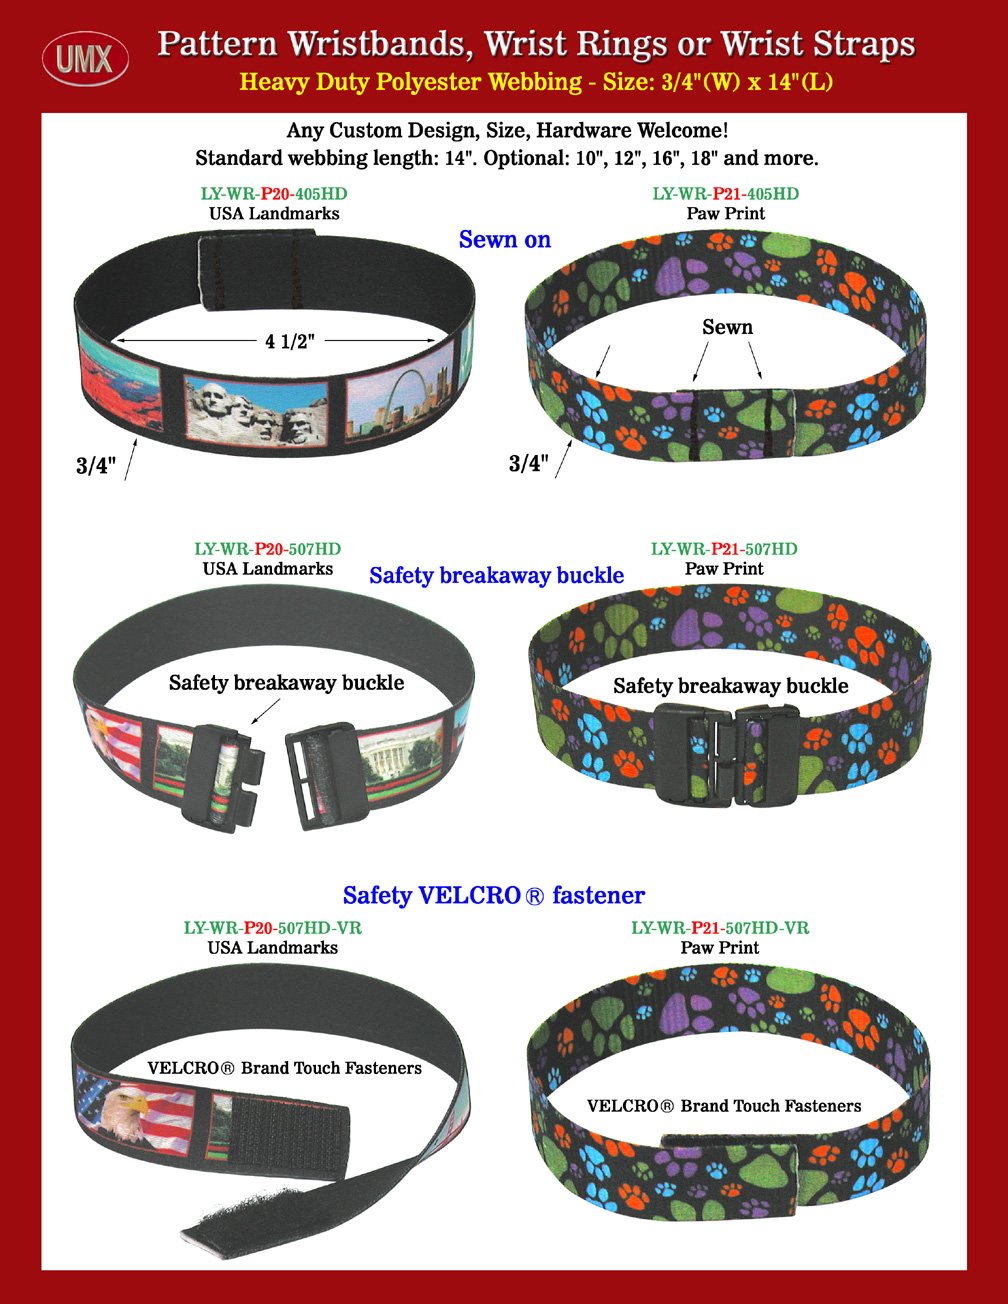 3/4" Unique Designed Pre-Printed Pattern Fabric Wrist Strap, Band or Round Ring Lanyard With Safety Buckle.